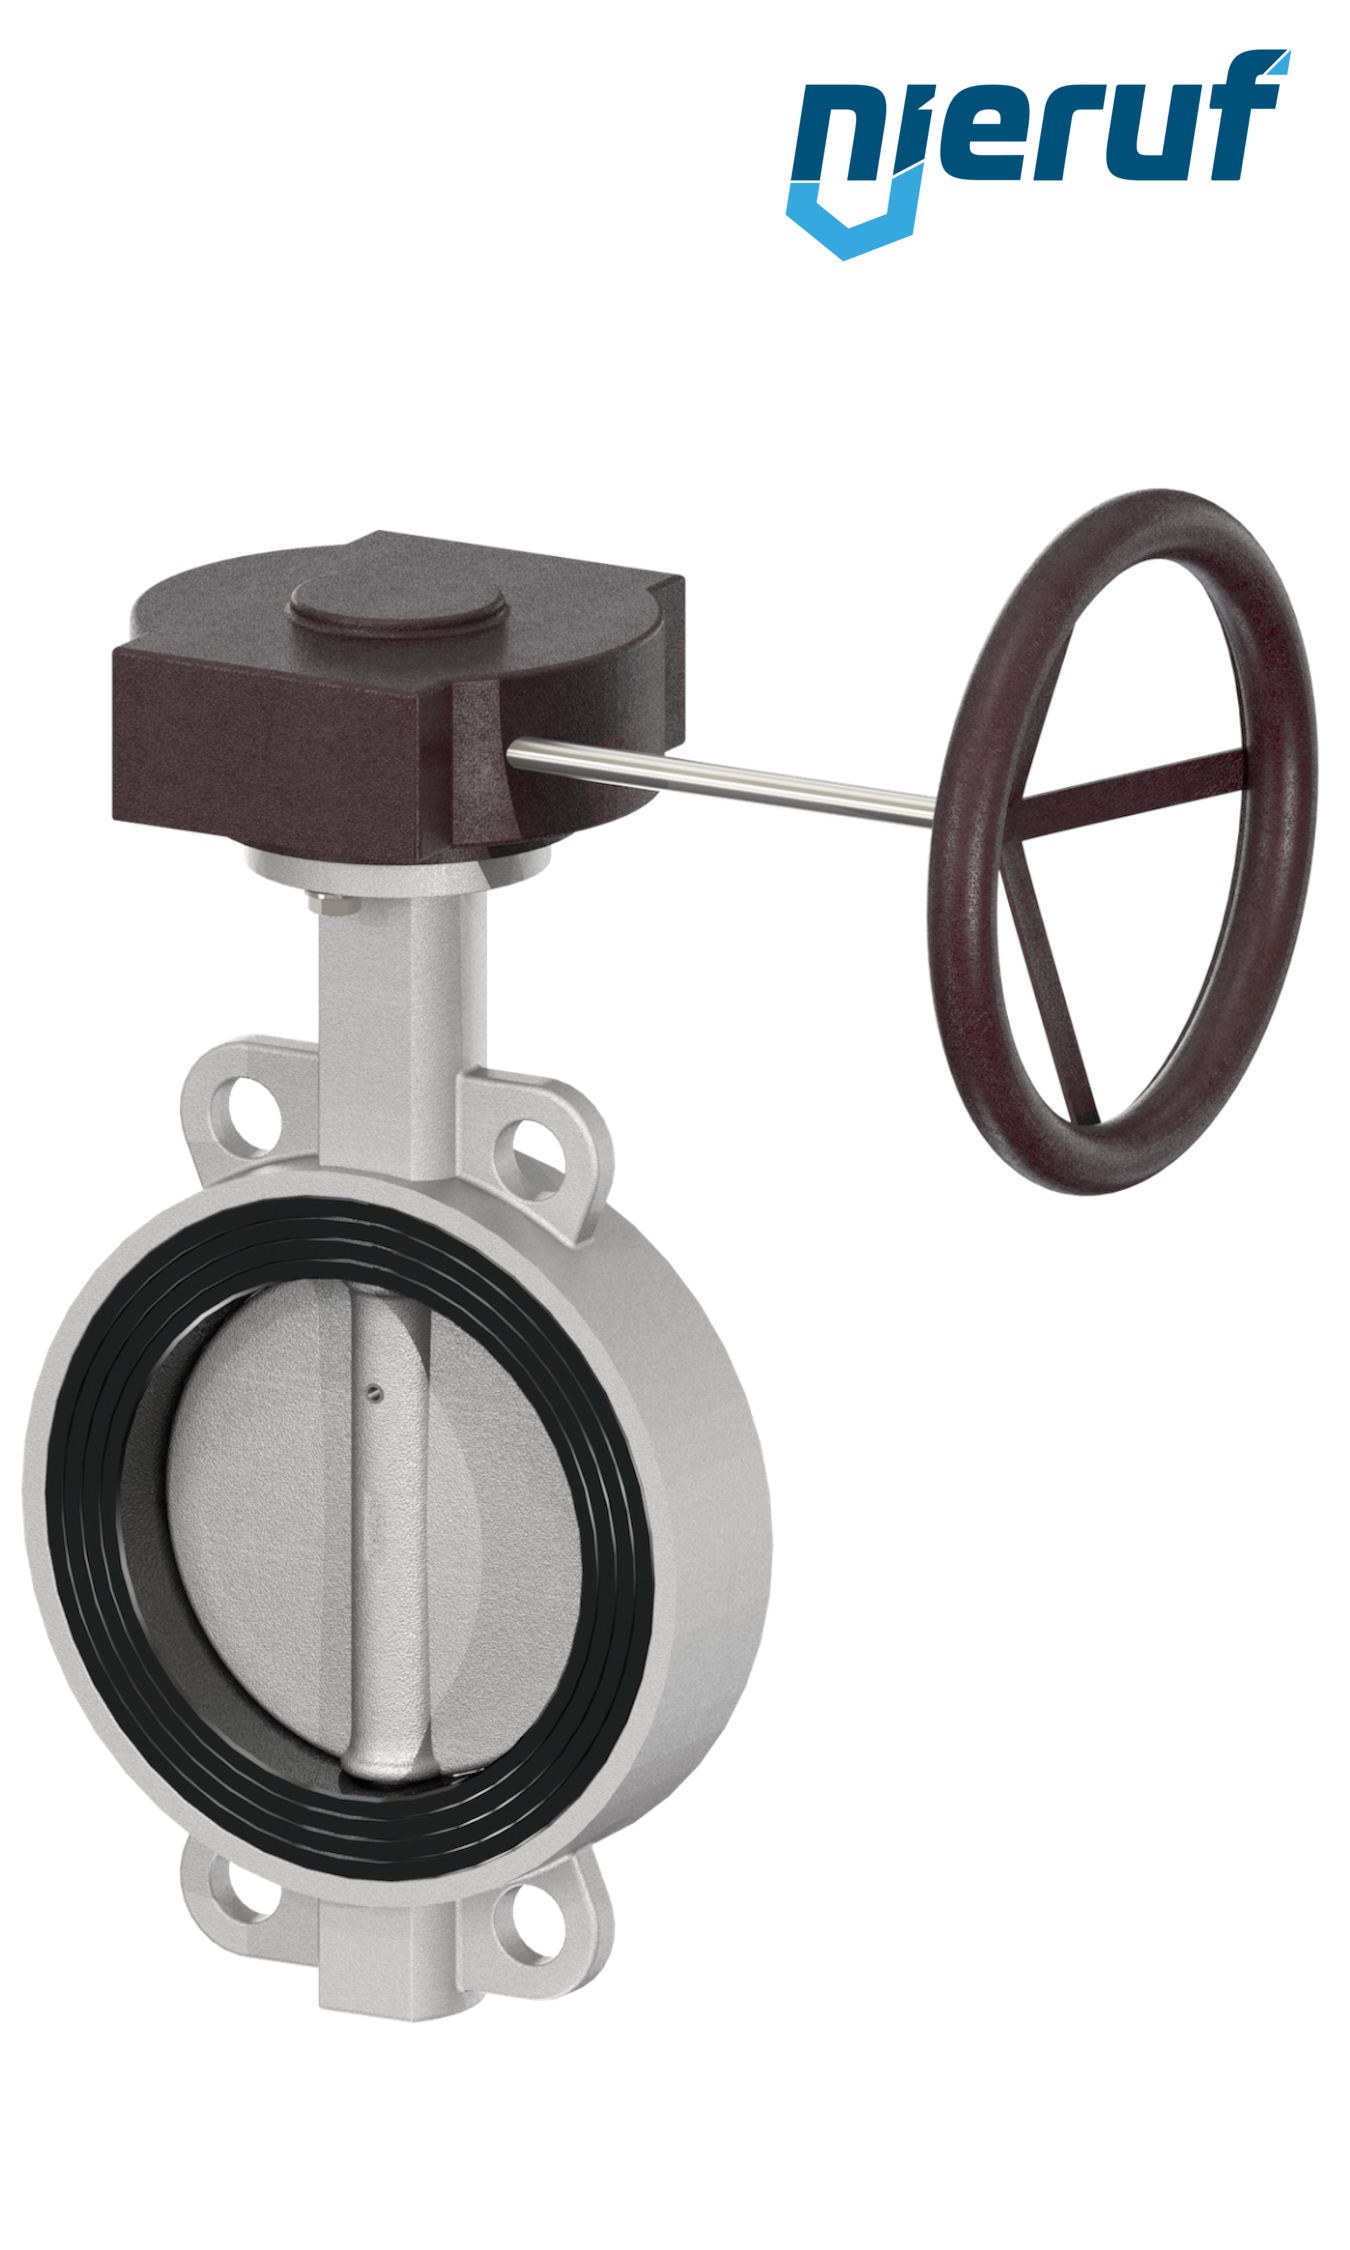 Butterfly-valve-stainless-steel DN40 PN16 AK08 EPDM gearbox